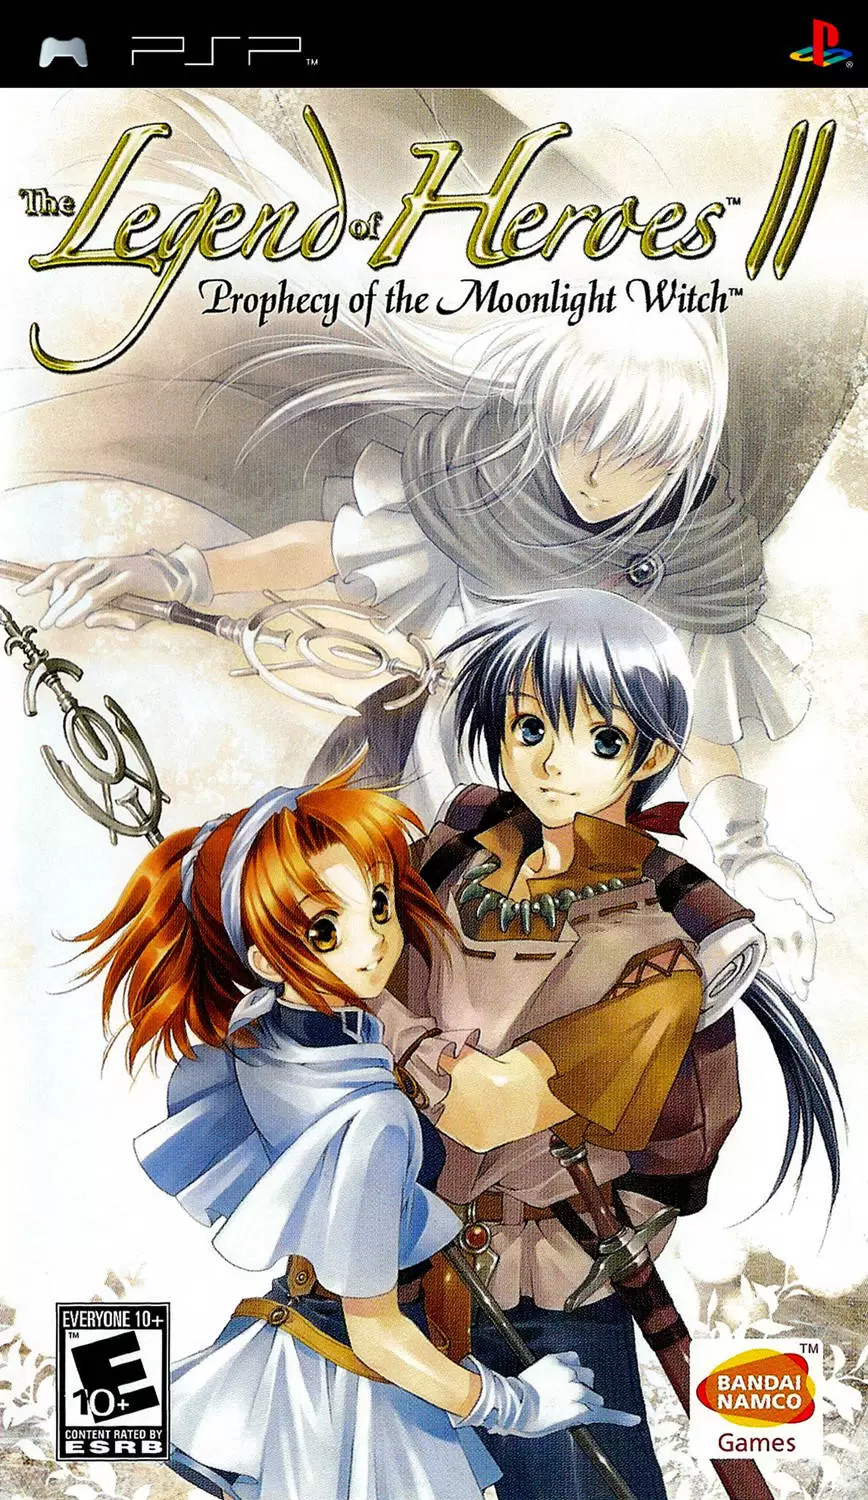 PSP Games - The Legend of Heroes II: Prophecy of the Moonlight Witch